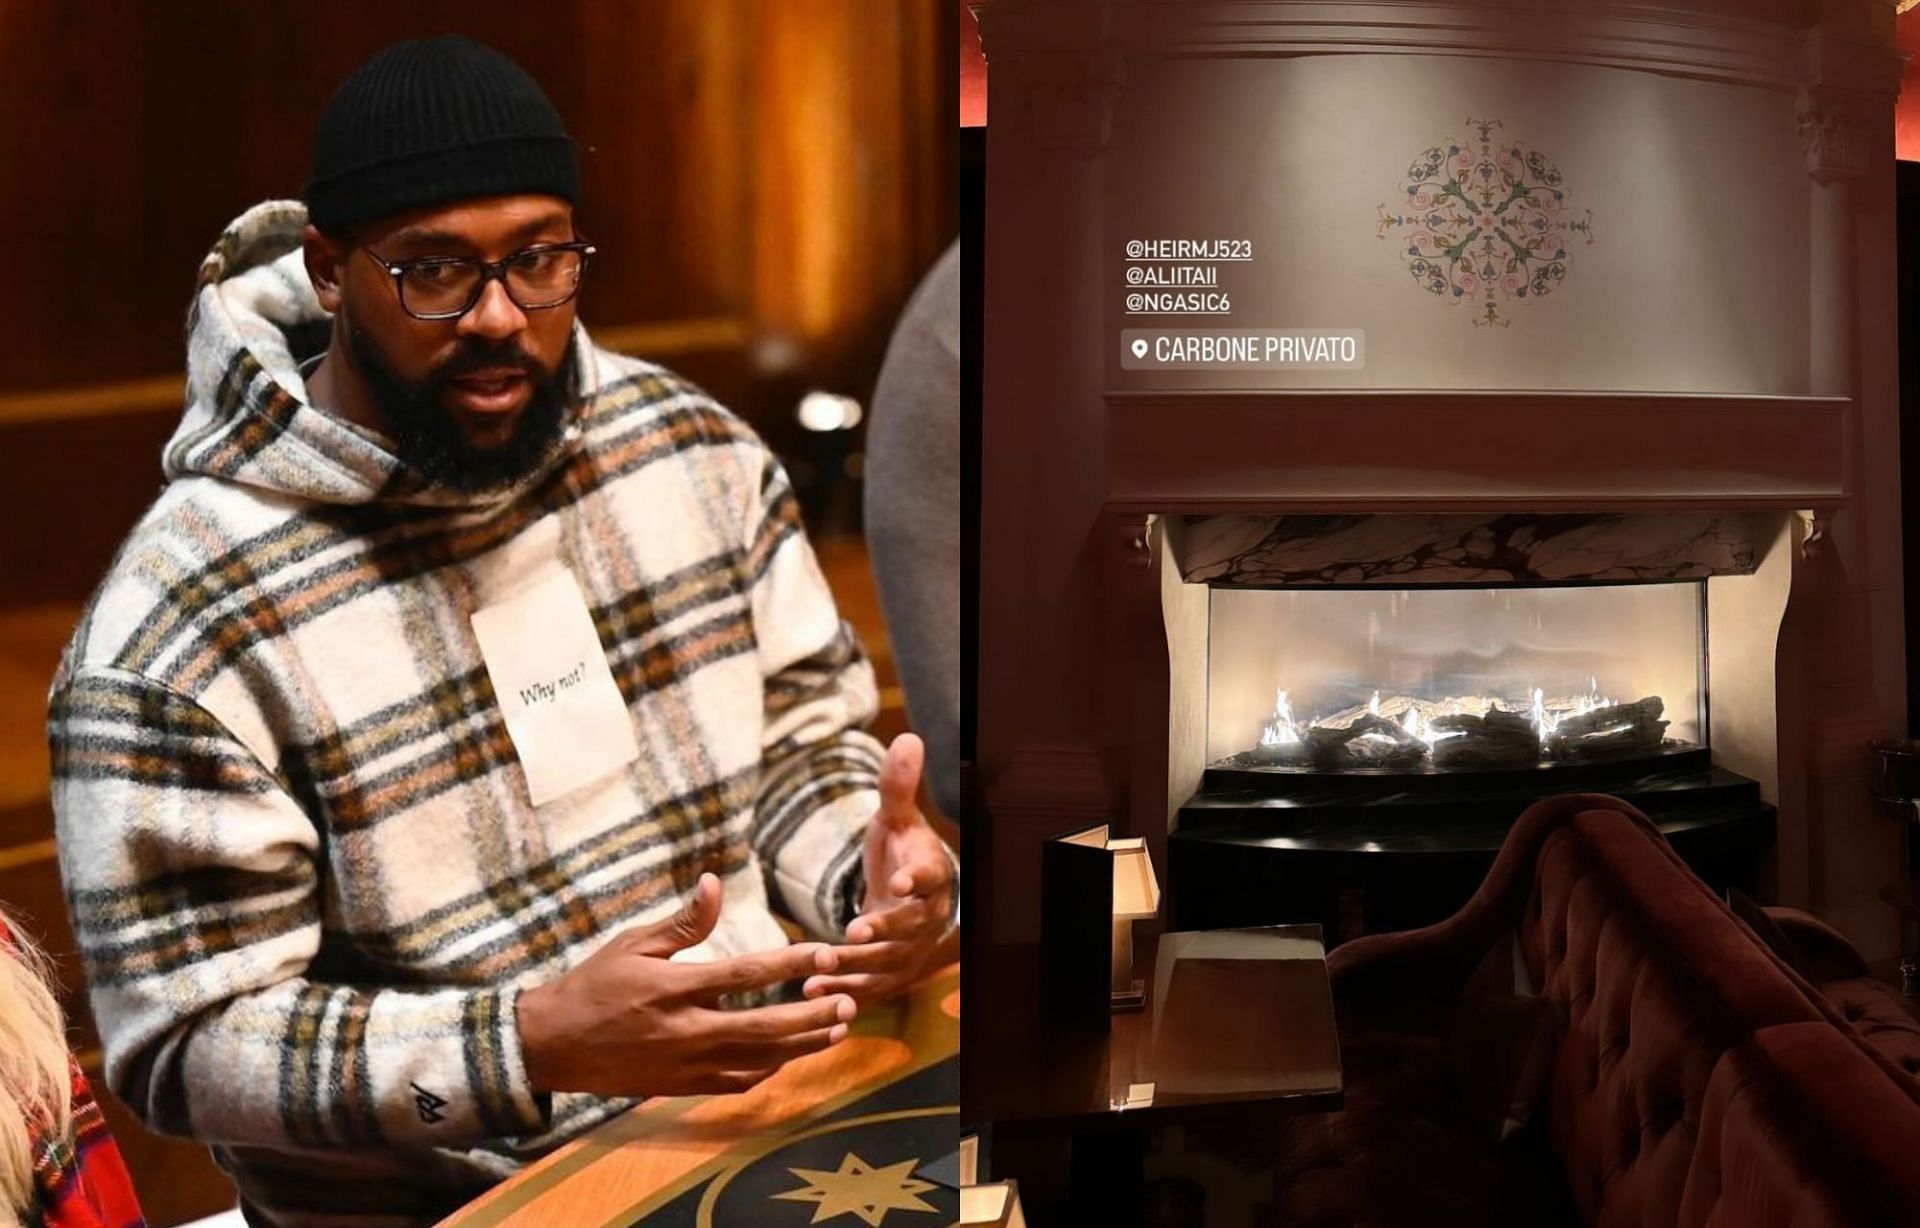 Marcus Jordan dines at the luxurious Carbone Privato in New York City